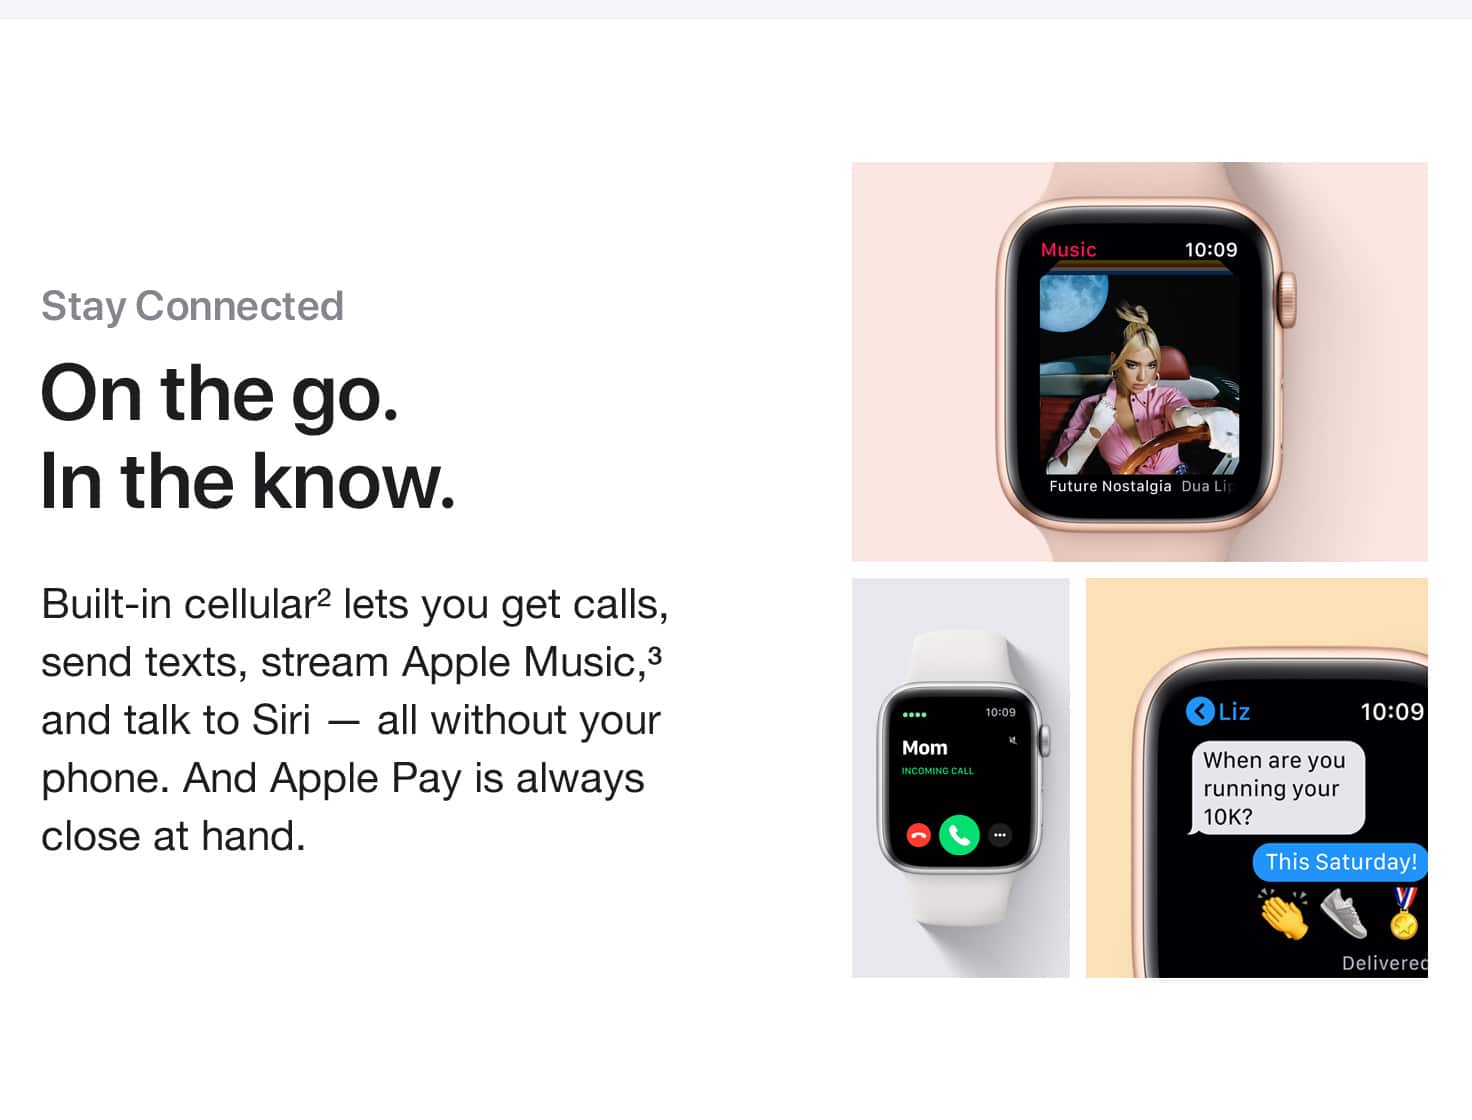 Stay Connected. On the go. In the know. Built-in cellular(2) lets you get calls, send texts, stream Apple Music,(3) and talk to Siri - all without your phone. And Apple Pay is always close at hand.